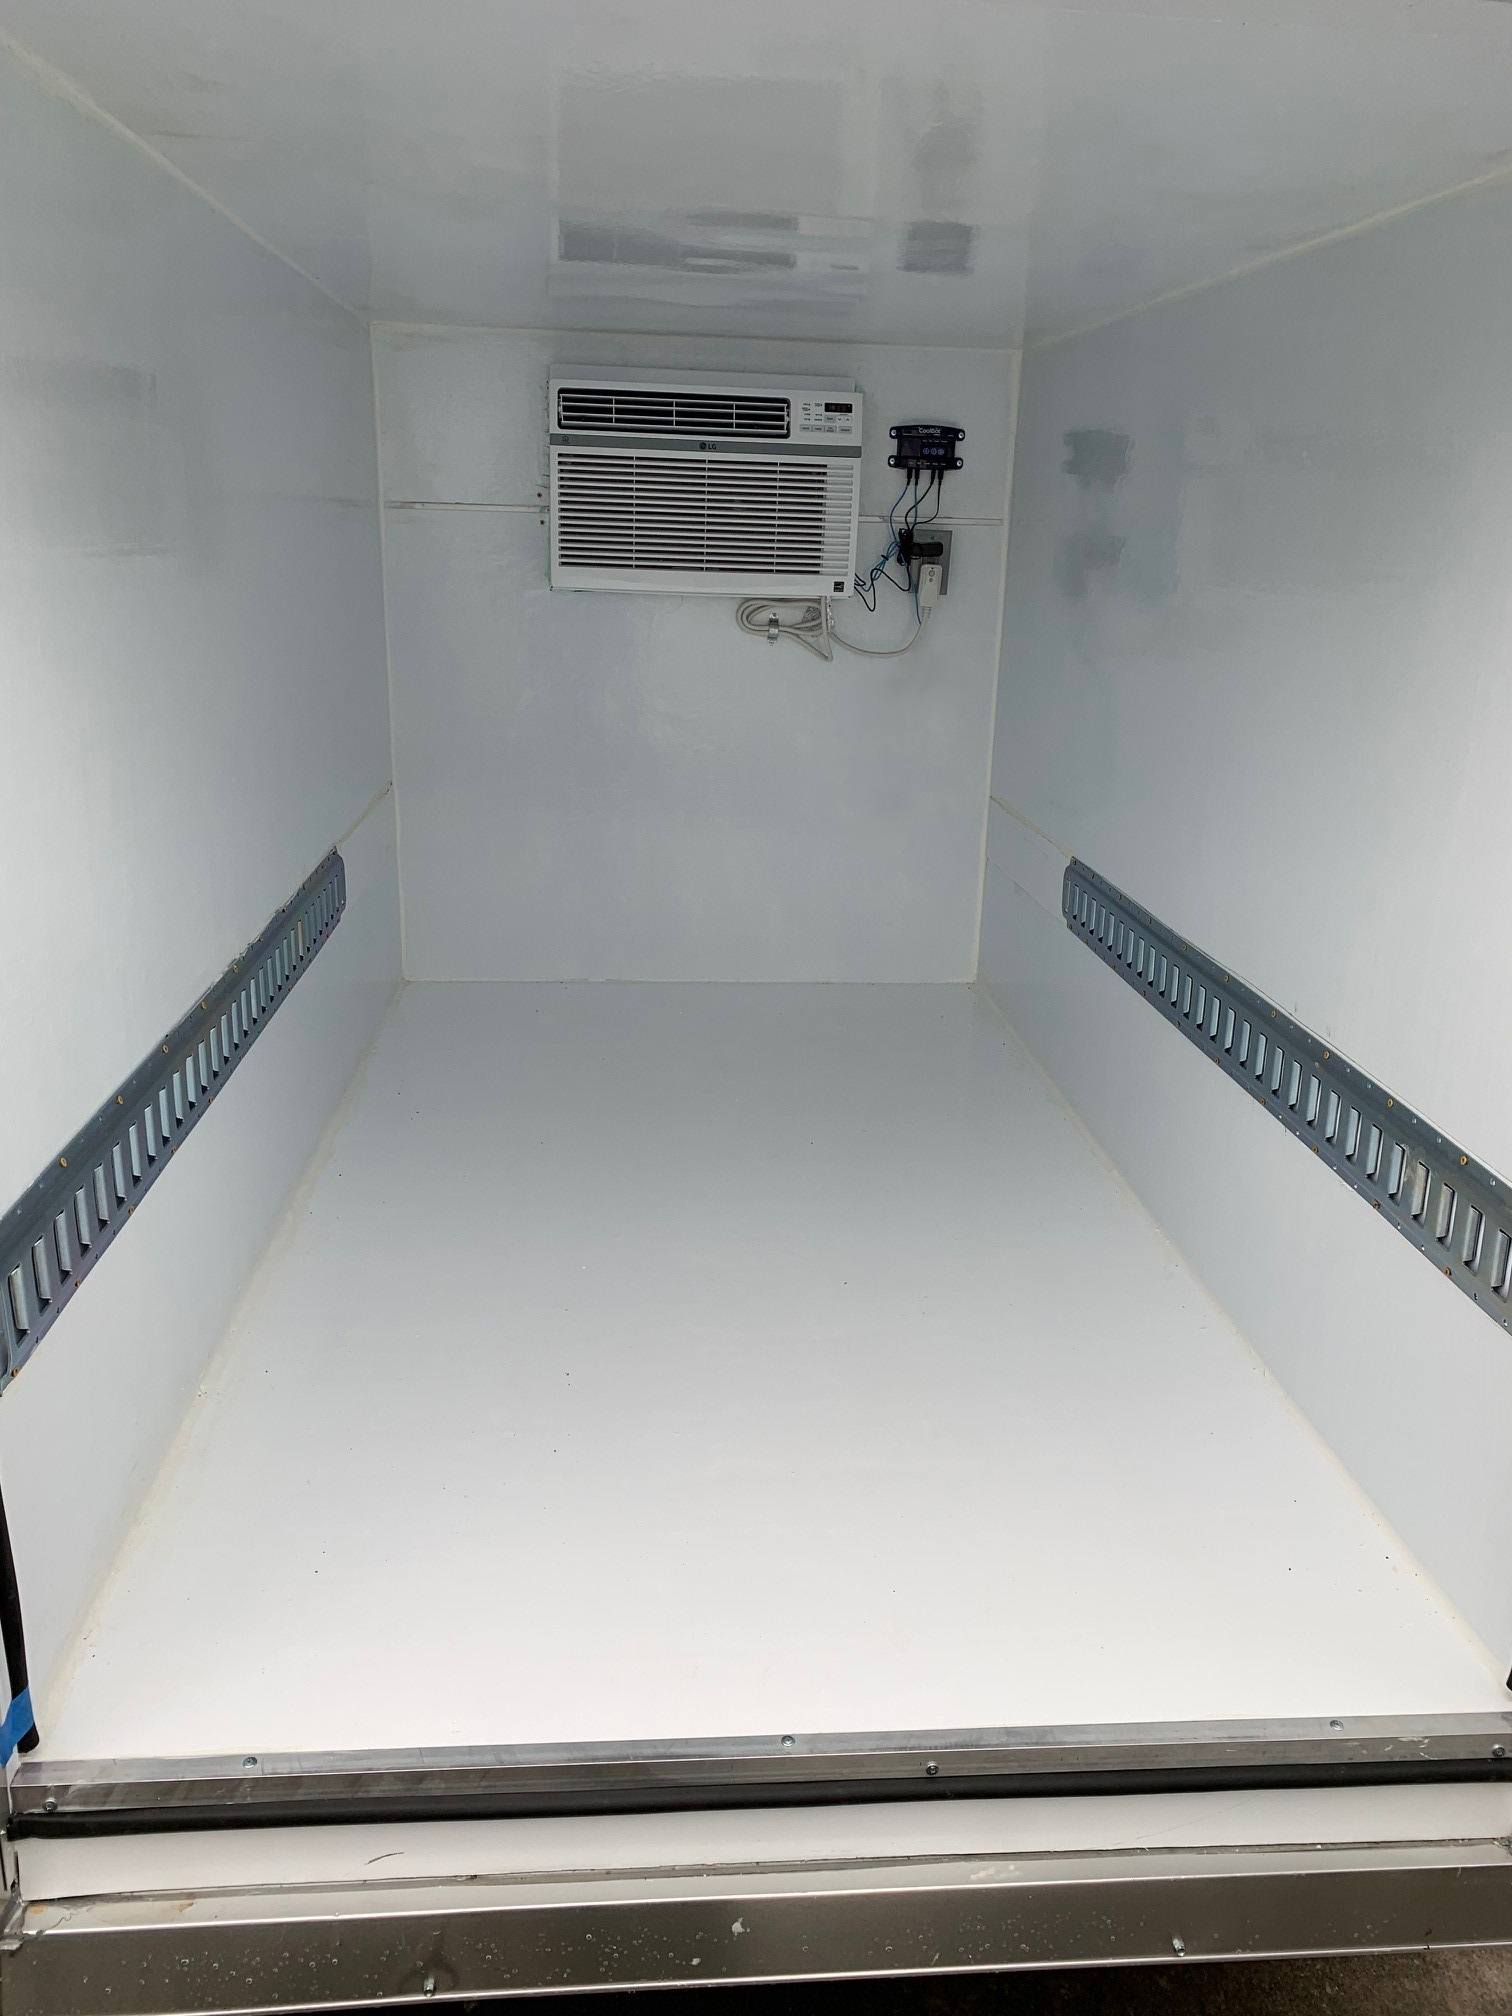 Hanging Meat Trailers for Sale, Small Refrigerated Deer Coolers